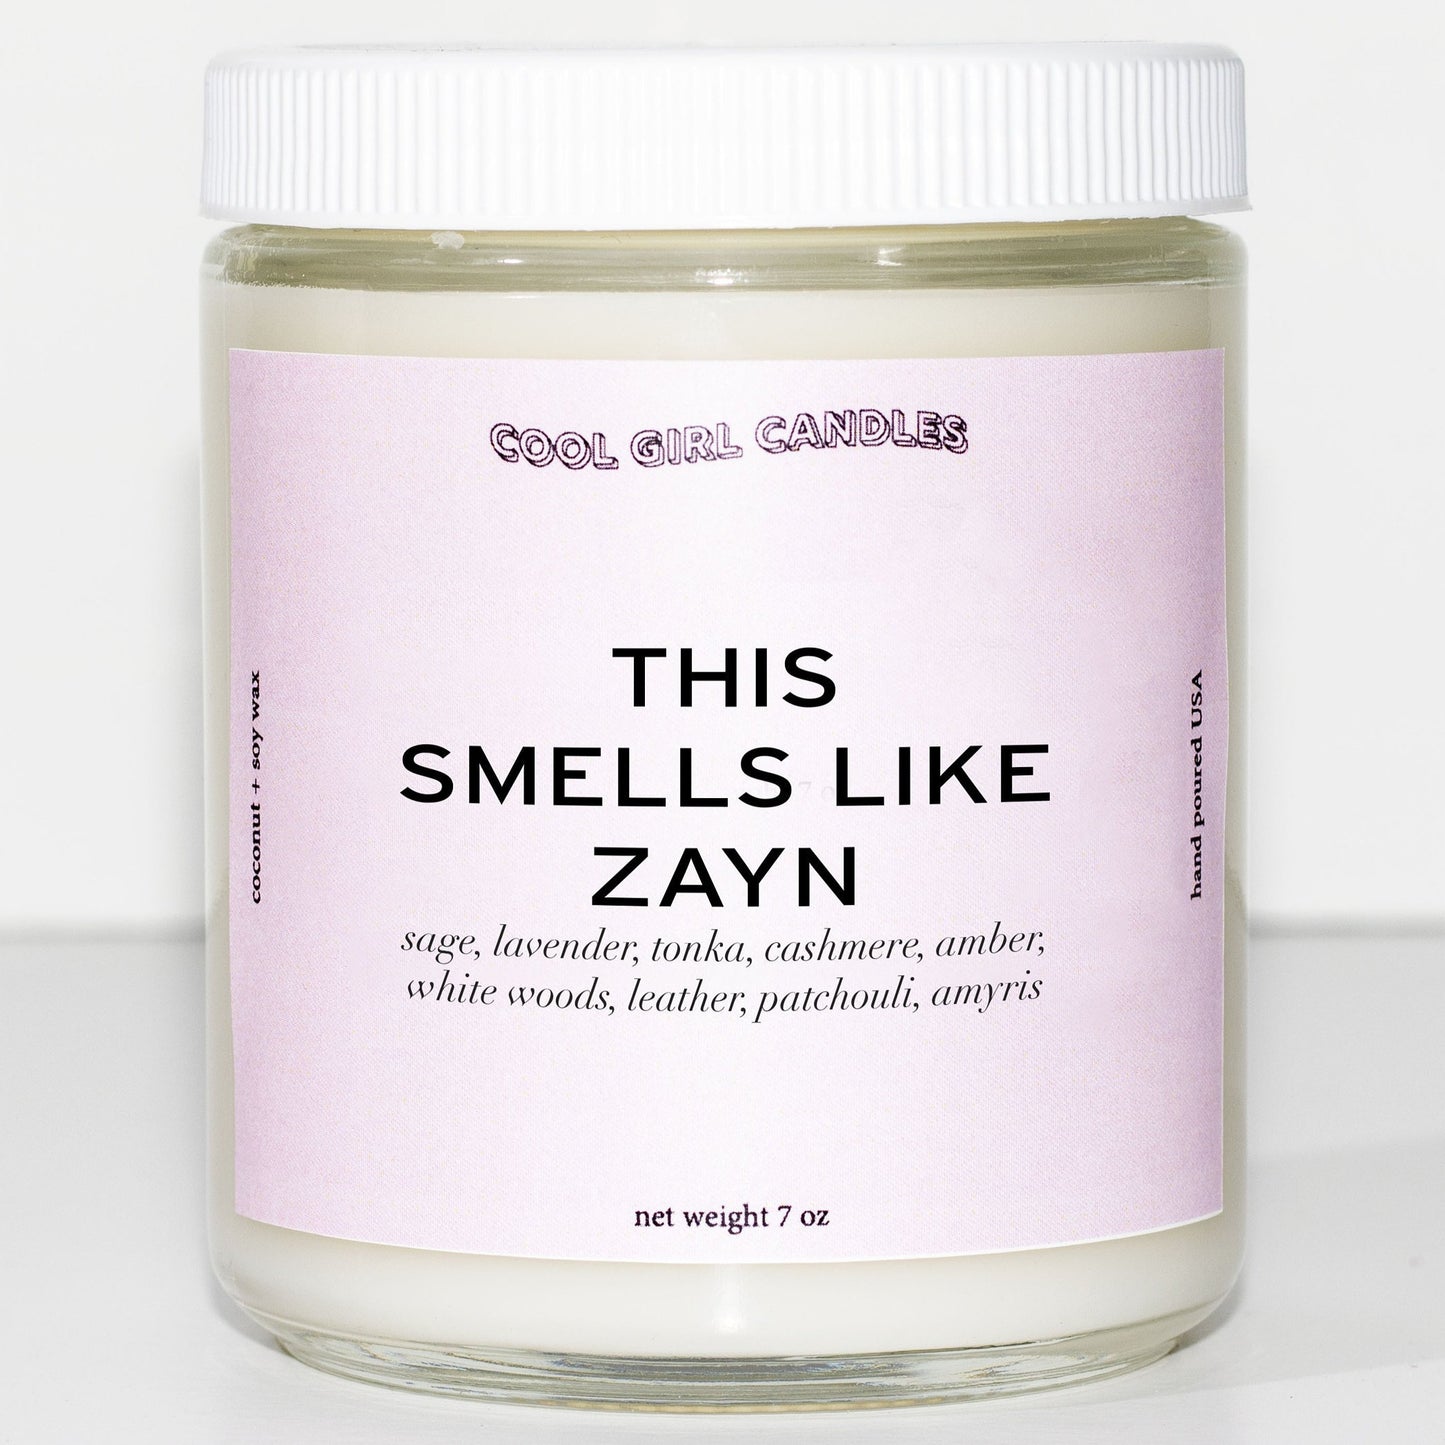 cool girl candles this smells like zayn malik candle cute aesthetic room decor jar candle pink hilarious candle dealers zayn malik merch this smells like harry styles candle one direction candle